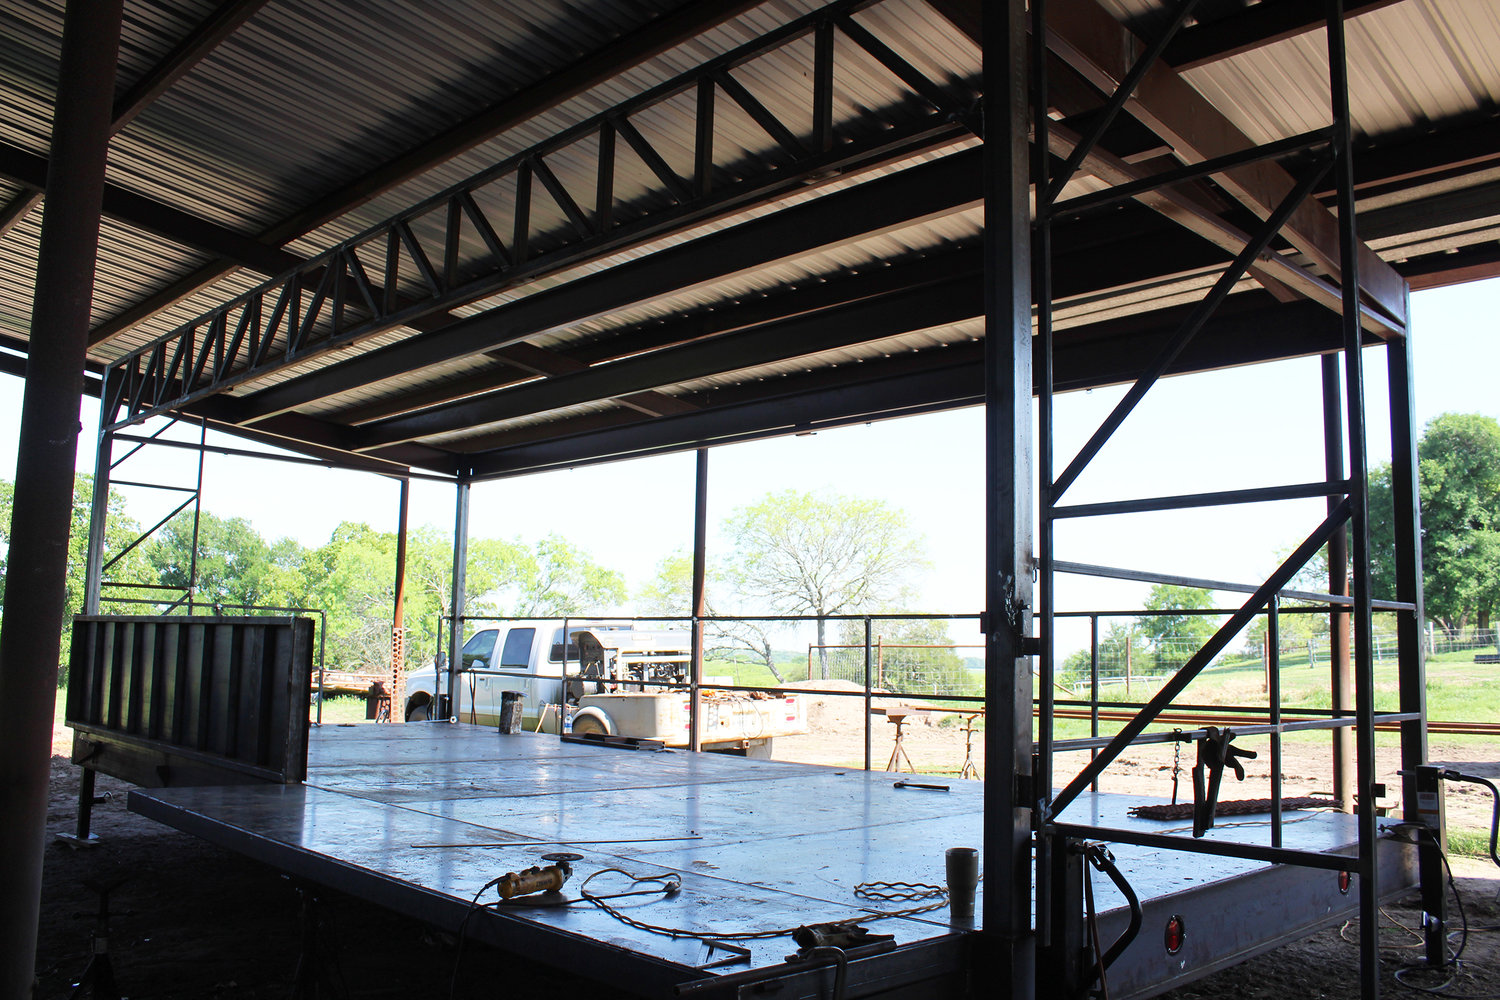 The city of Gonzales has commissioned Mark Metzler and his team to construct a new stage which the city can use for the Summer Concert Series and Come and Take It. The new stage is sturdily built, is extremely functional and easy to fold out and tear down.